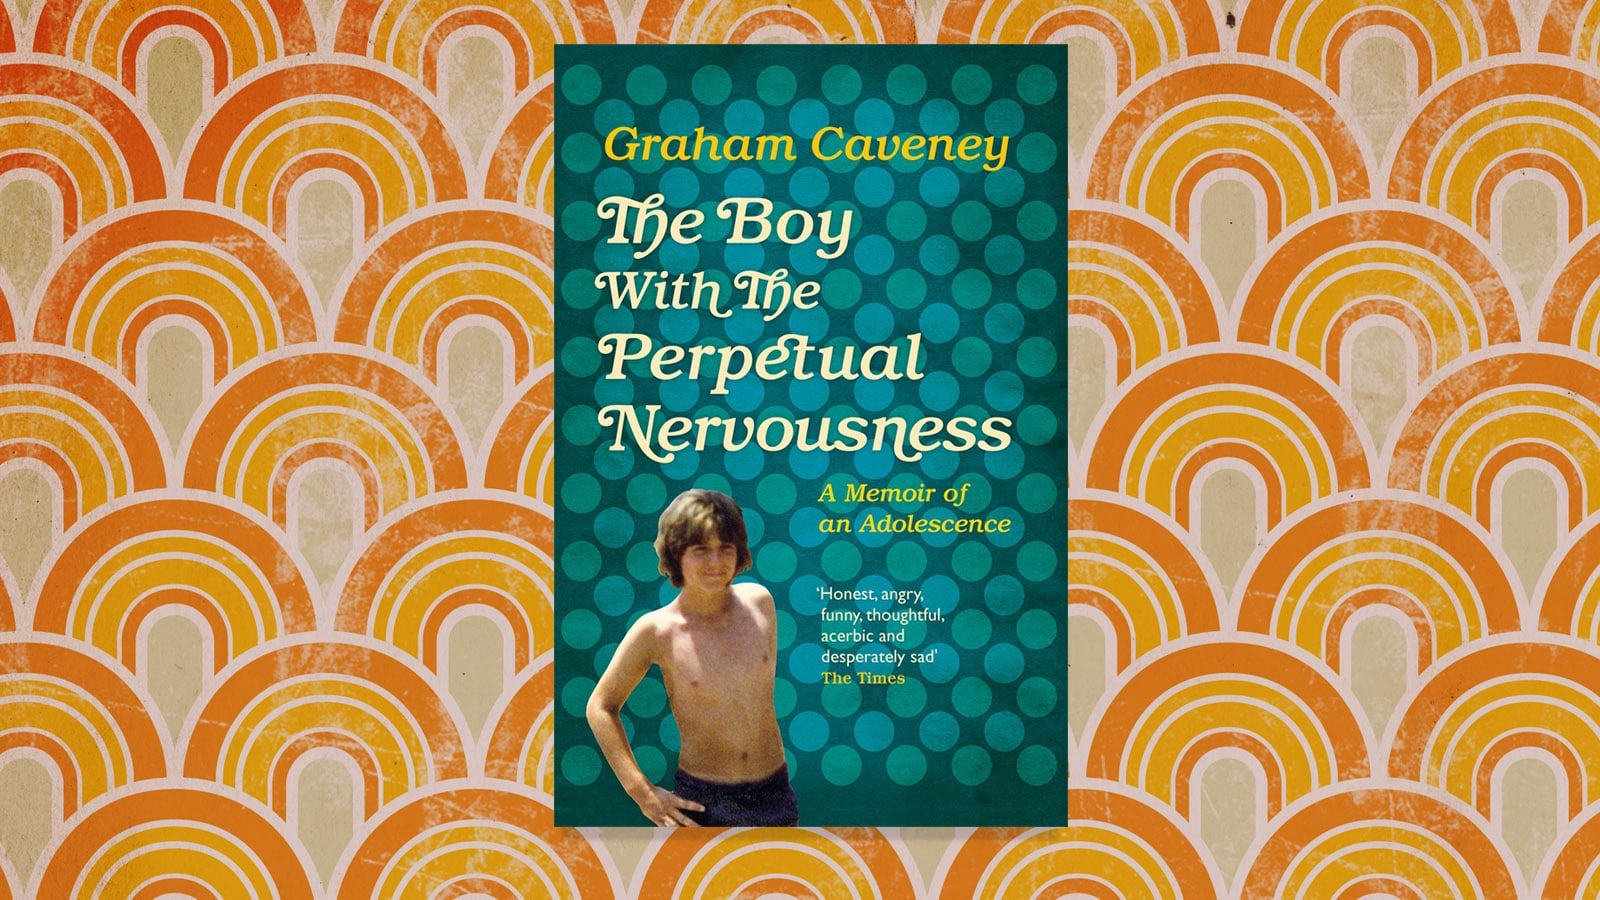 The jacket cover for the book, The Boy with the perpetual nervousness by Graham Caveney, depicting a shirtless boy with his hand on his hip